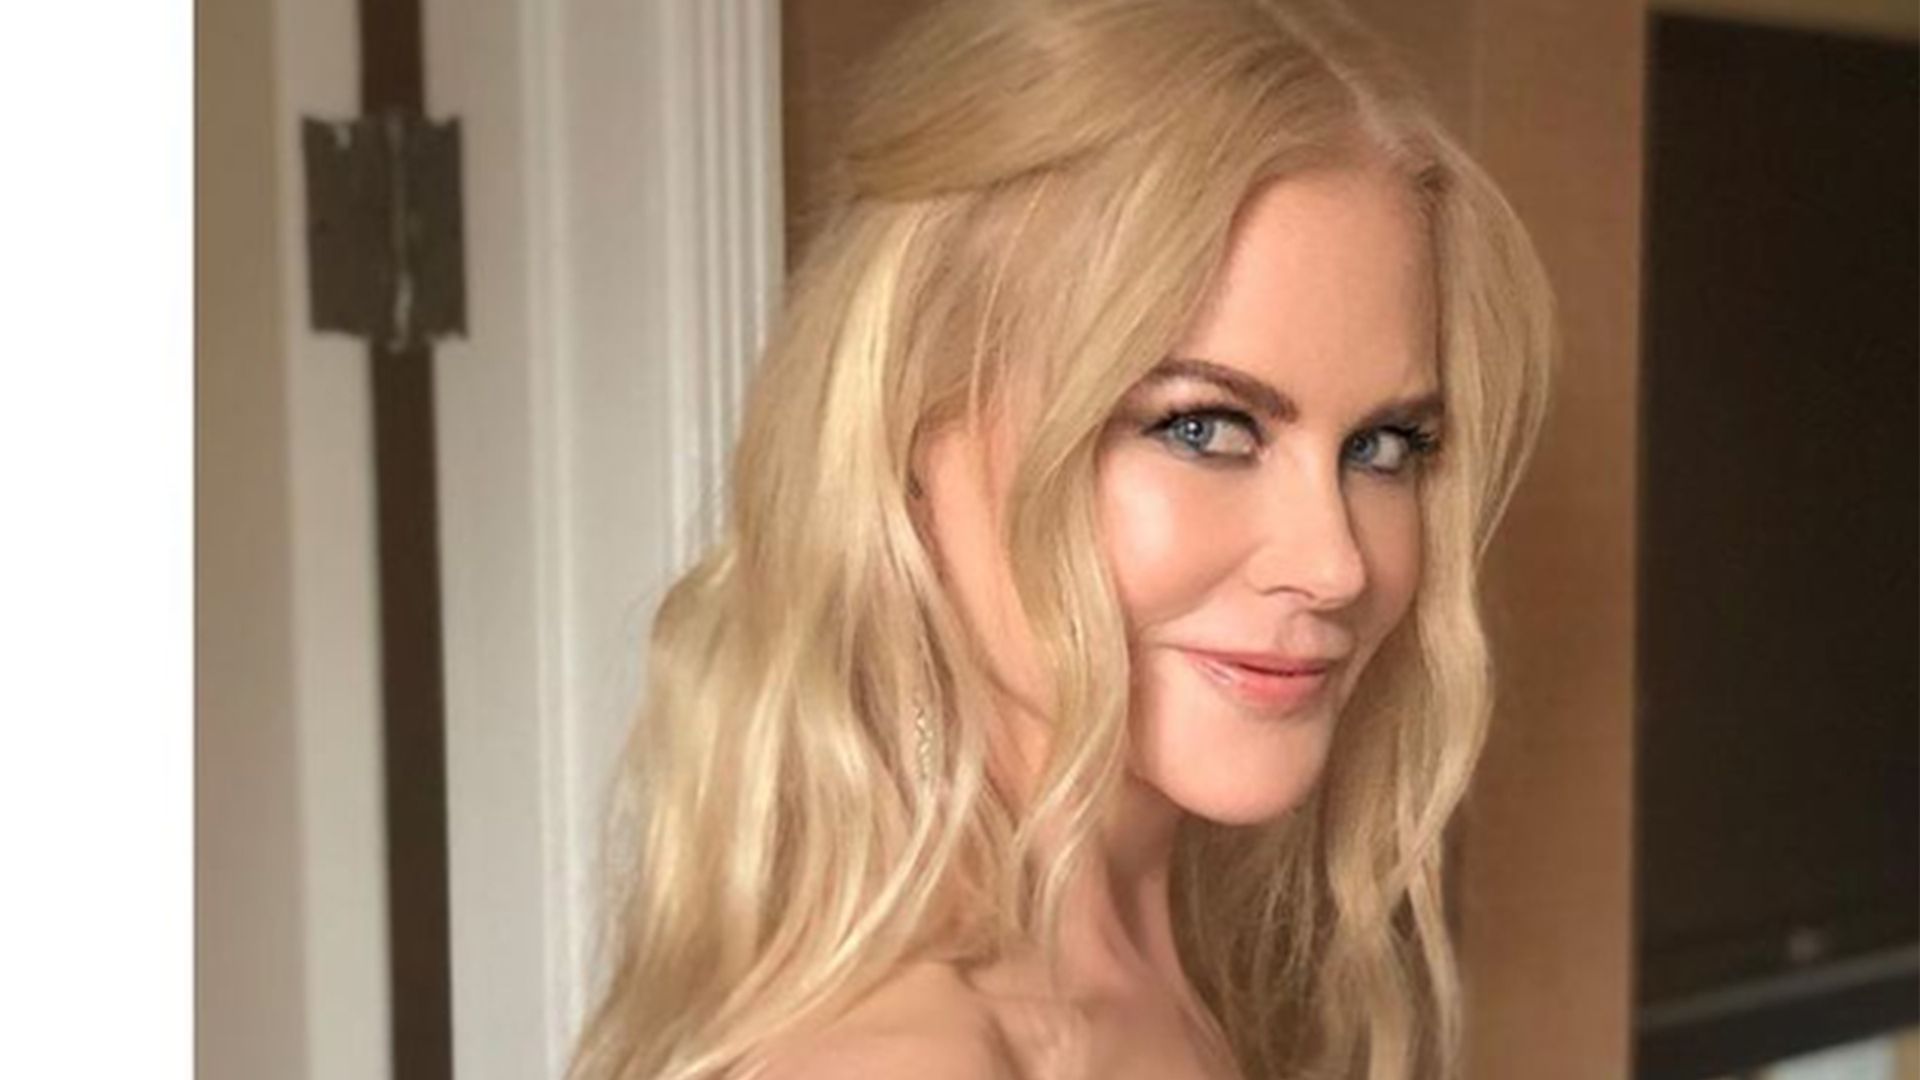 Nicole Kidman supported by daughter Bella as she makes stunning LA appearance